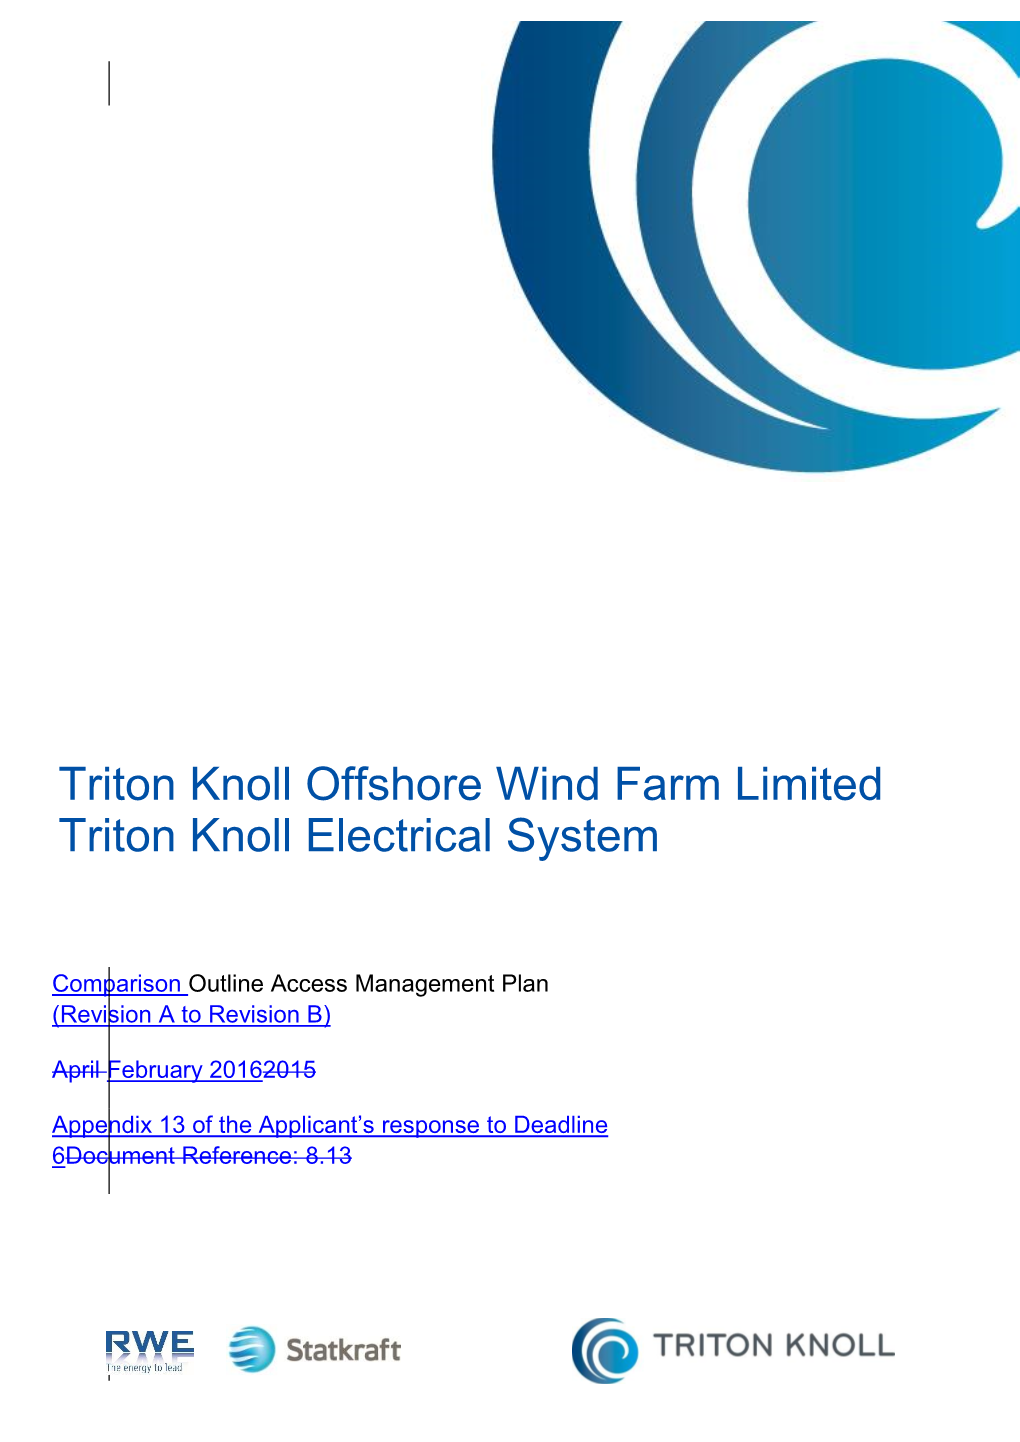 Triton Knoll Offshore Wind Farm Limited Triton Knoll Electrical System